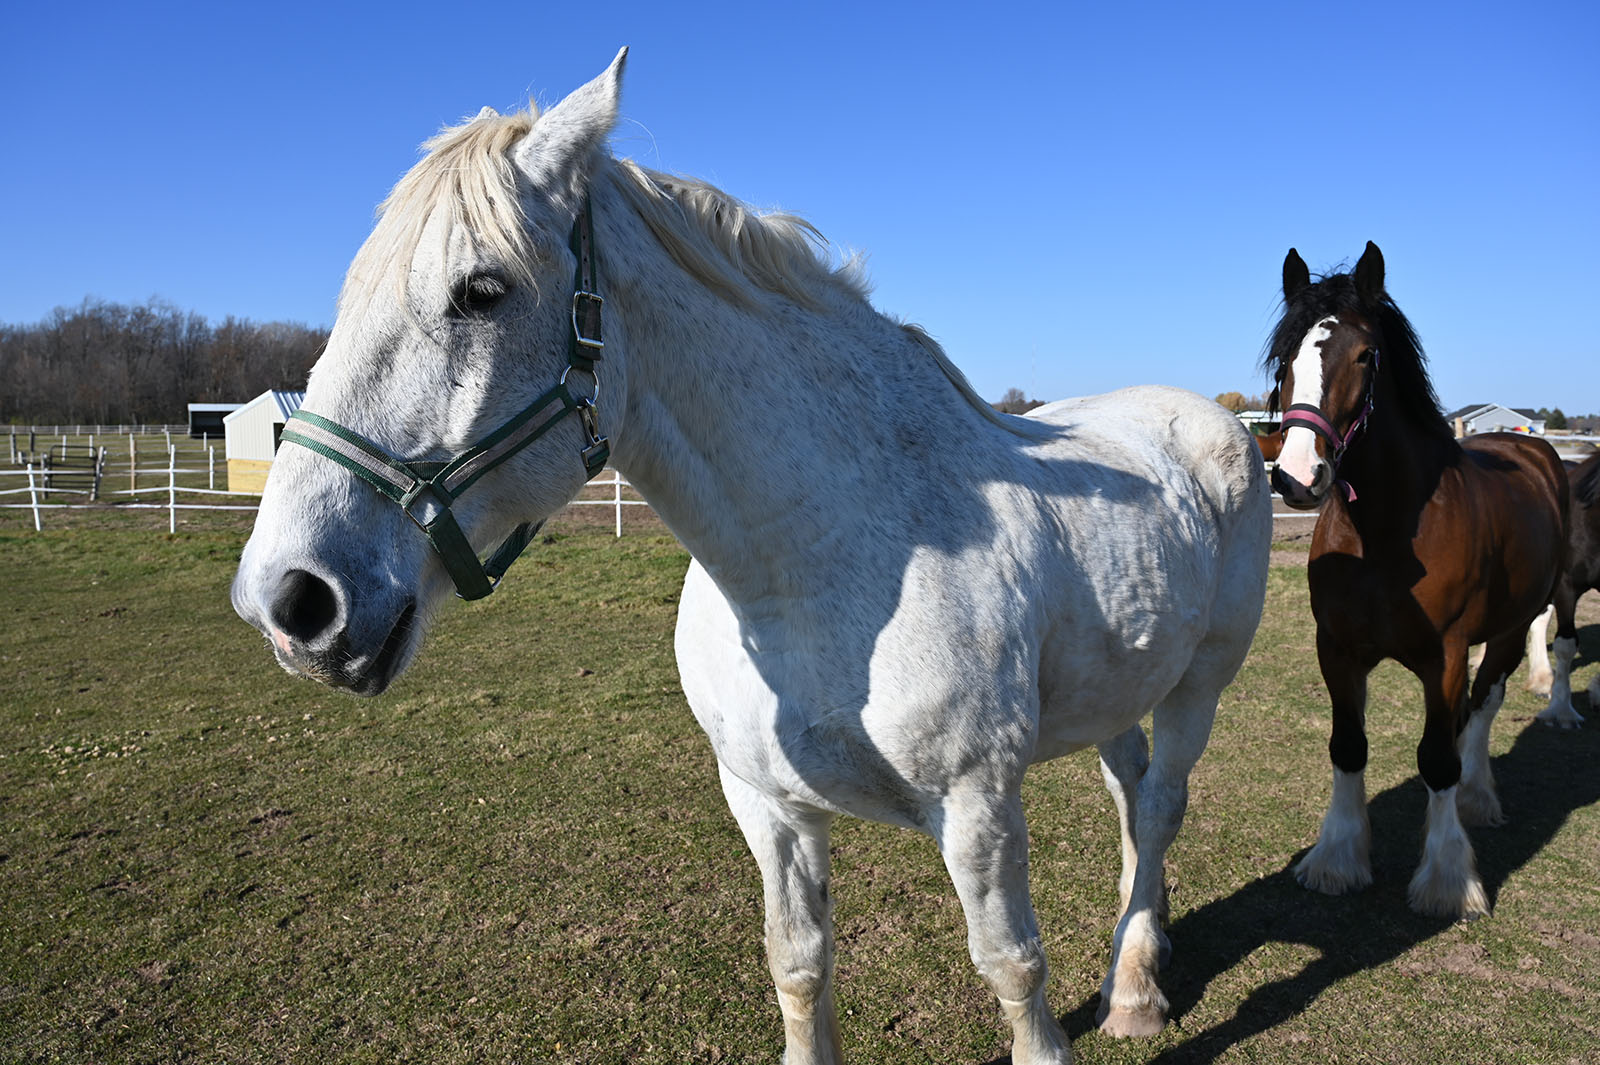 White and brown horse together in open pasture